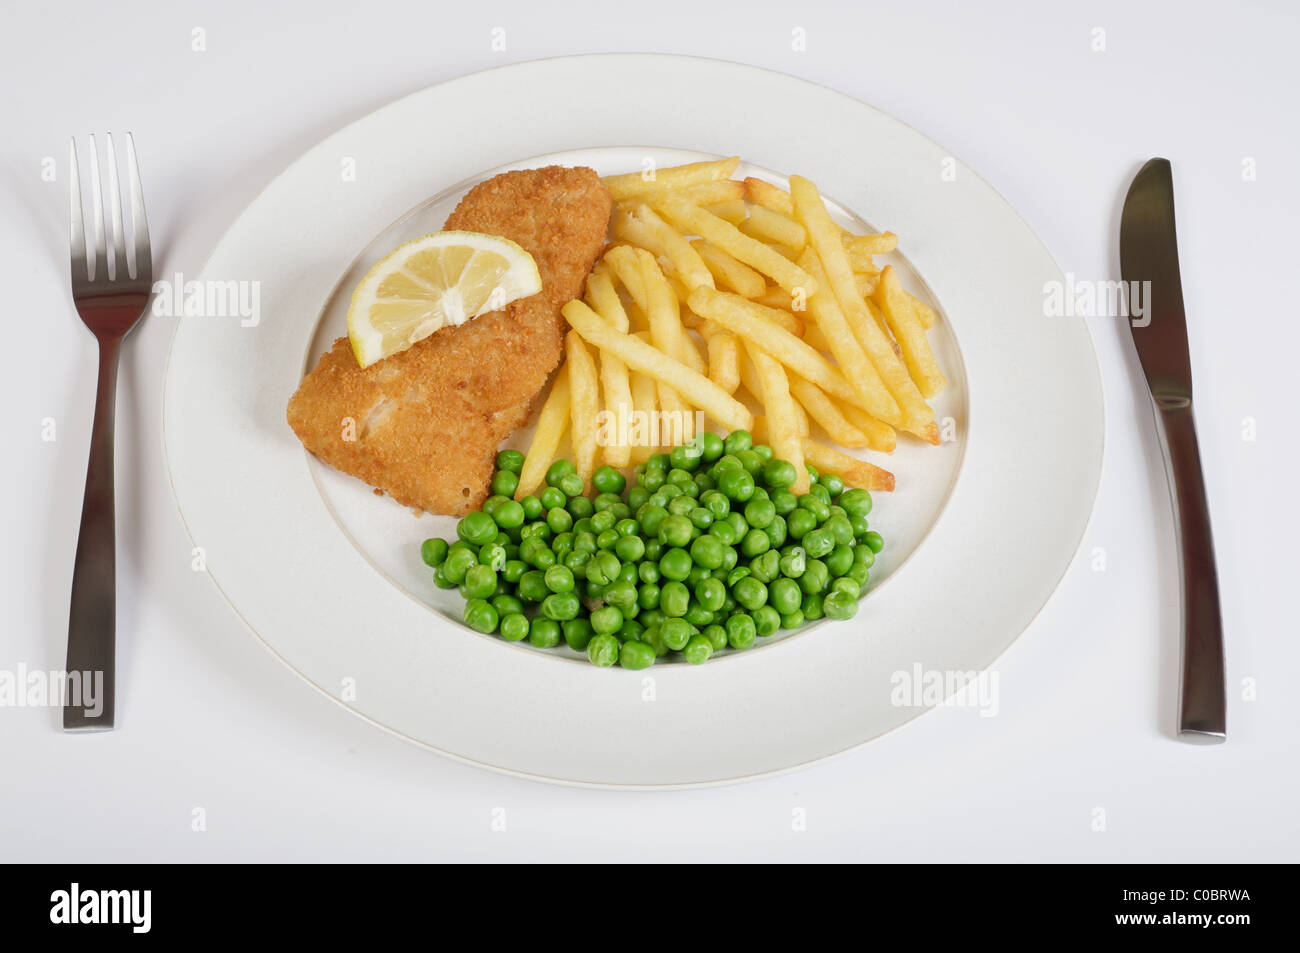 Frozen fish chips and peas Stock Photo